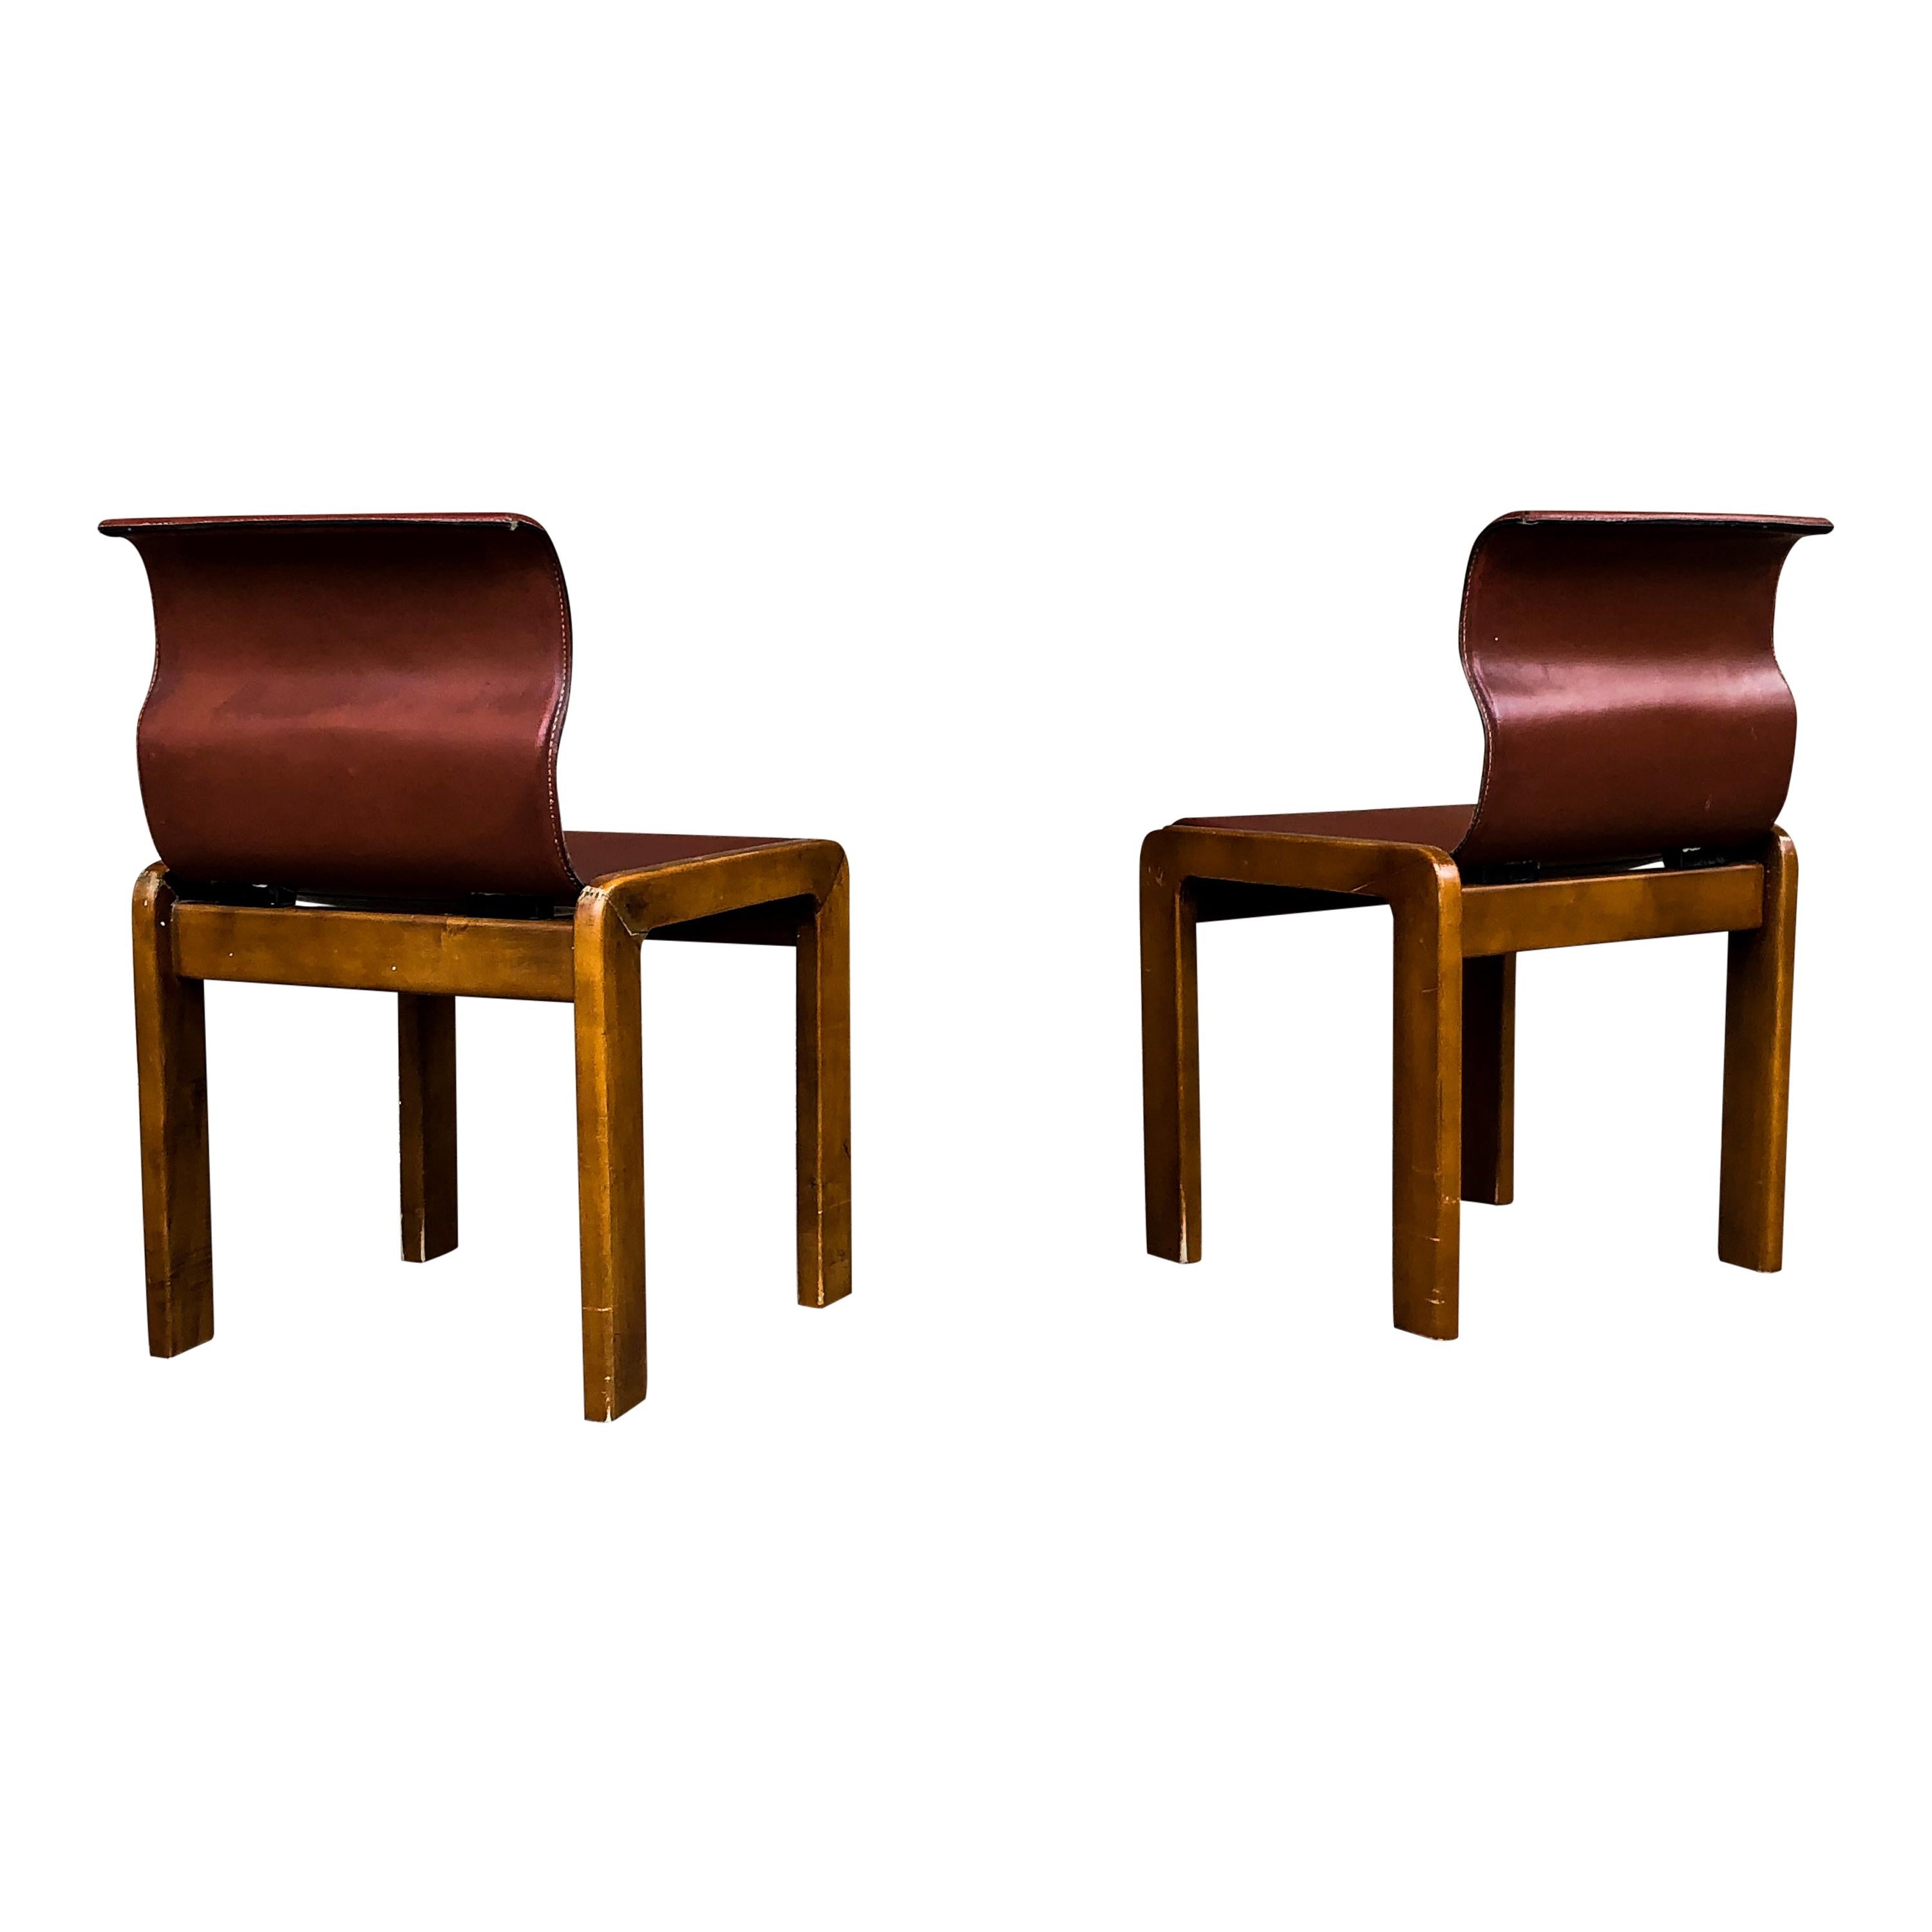 Afra & Tobia Scarpa Midcentury Leather and Plywood Dining Chair, 1966, Set of 4 For Sale 5